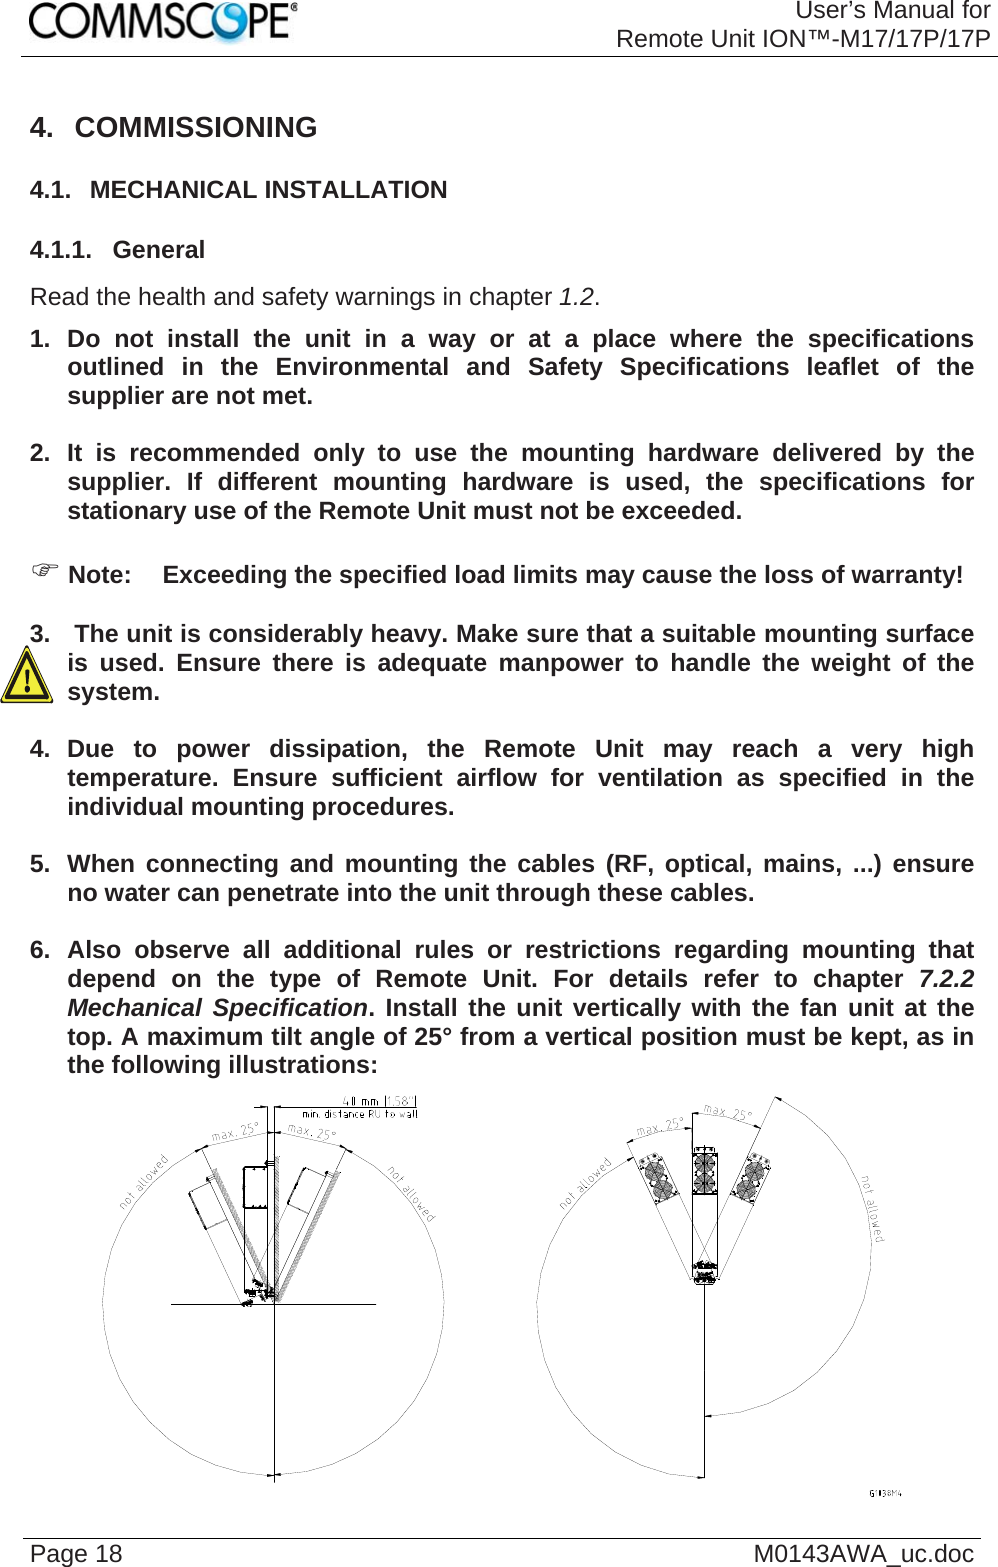 User’s Manual forRemote Unit ION™-M17/17P/17P Page 18  M0143AWA_uc.doc4. COMMISSIONING 4.1.  MECHANICAL INSTALLATION 4.1.1.  General Read the health and safety warnings in chapter 1.2. 1. Do not install the unit in a way or at a place where the specifications outlined in the Environmental and Safety Specifications leaflet of the supplier are not met.  2. It is recommended only to use the mounting hardware delivered by the supplier. If different mounting hardware is used, the specifications for stationary use of the Remote Unit must not be exceeded.  ) Note:  Exceeding the specified load limits may cause the loss of warranty!  3.   The unit is considerably heavy. Make sure that a suitable mounting surface is used. Ensure there is adequate manpower to handle the weight of the system.  4. Due to power dissipation, the Remote Unit may reach a very high temperature. Ensure sufficient airflow for ventilation as specified in the individual mounting procedures.  5.  When connecting and mounting the cables (RF, optical, mains, ...) ensure no water can penetrate into the unit through these cables.  6. Also observe all additional rules or restrictions regarding mounting that depend on the type of Remote Unit. For details refer to chapter 7.2.2 Mechanical Specification. Install the unit vertically with the fan unit at the top. A maximum tilt angle of 25° from a vertical position must be kept, as in the following illustrations:   